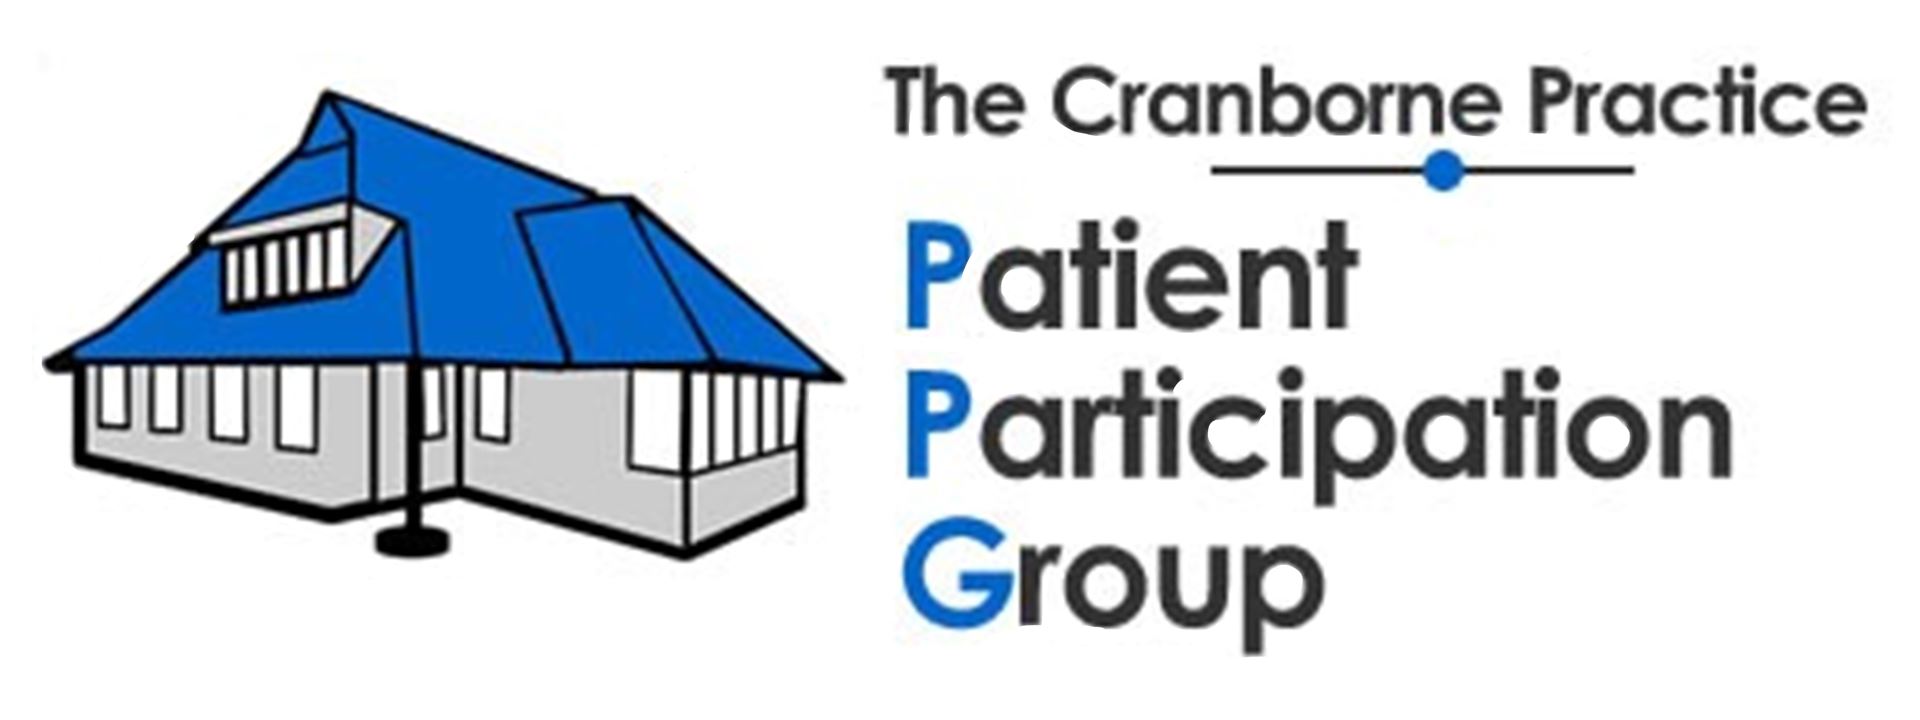 a drawing of the Cranborne surgery site and the words The Cranborne Practice Patient Participation Group